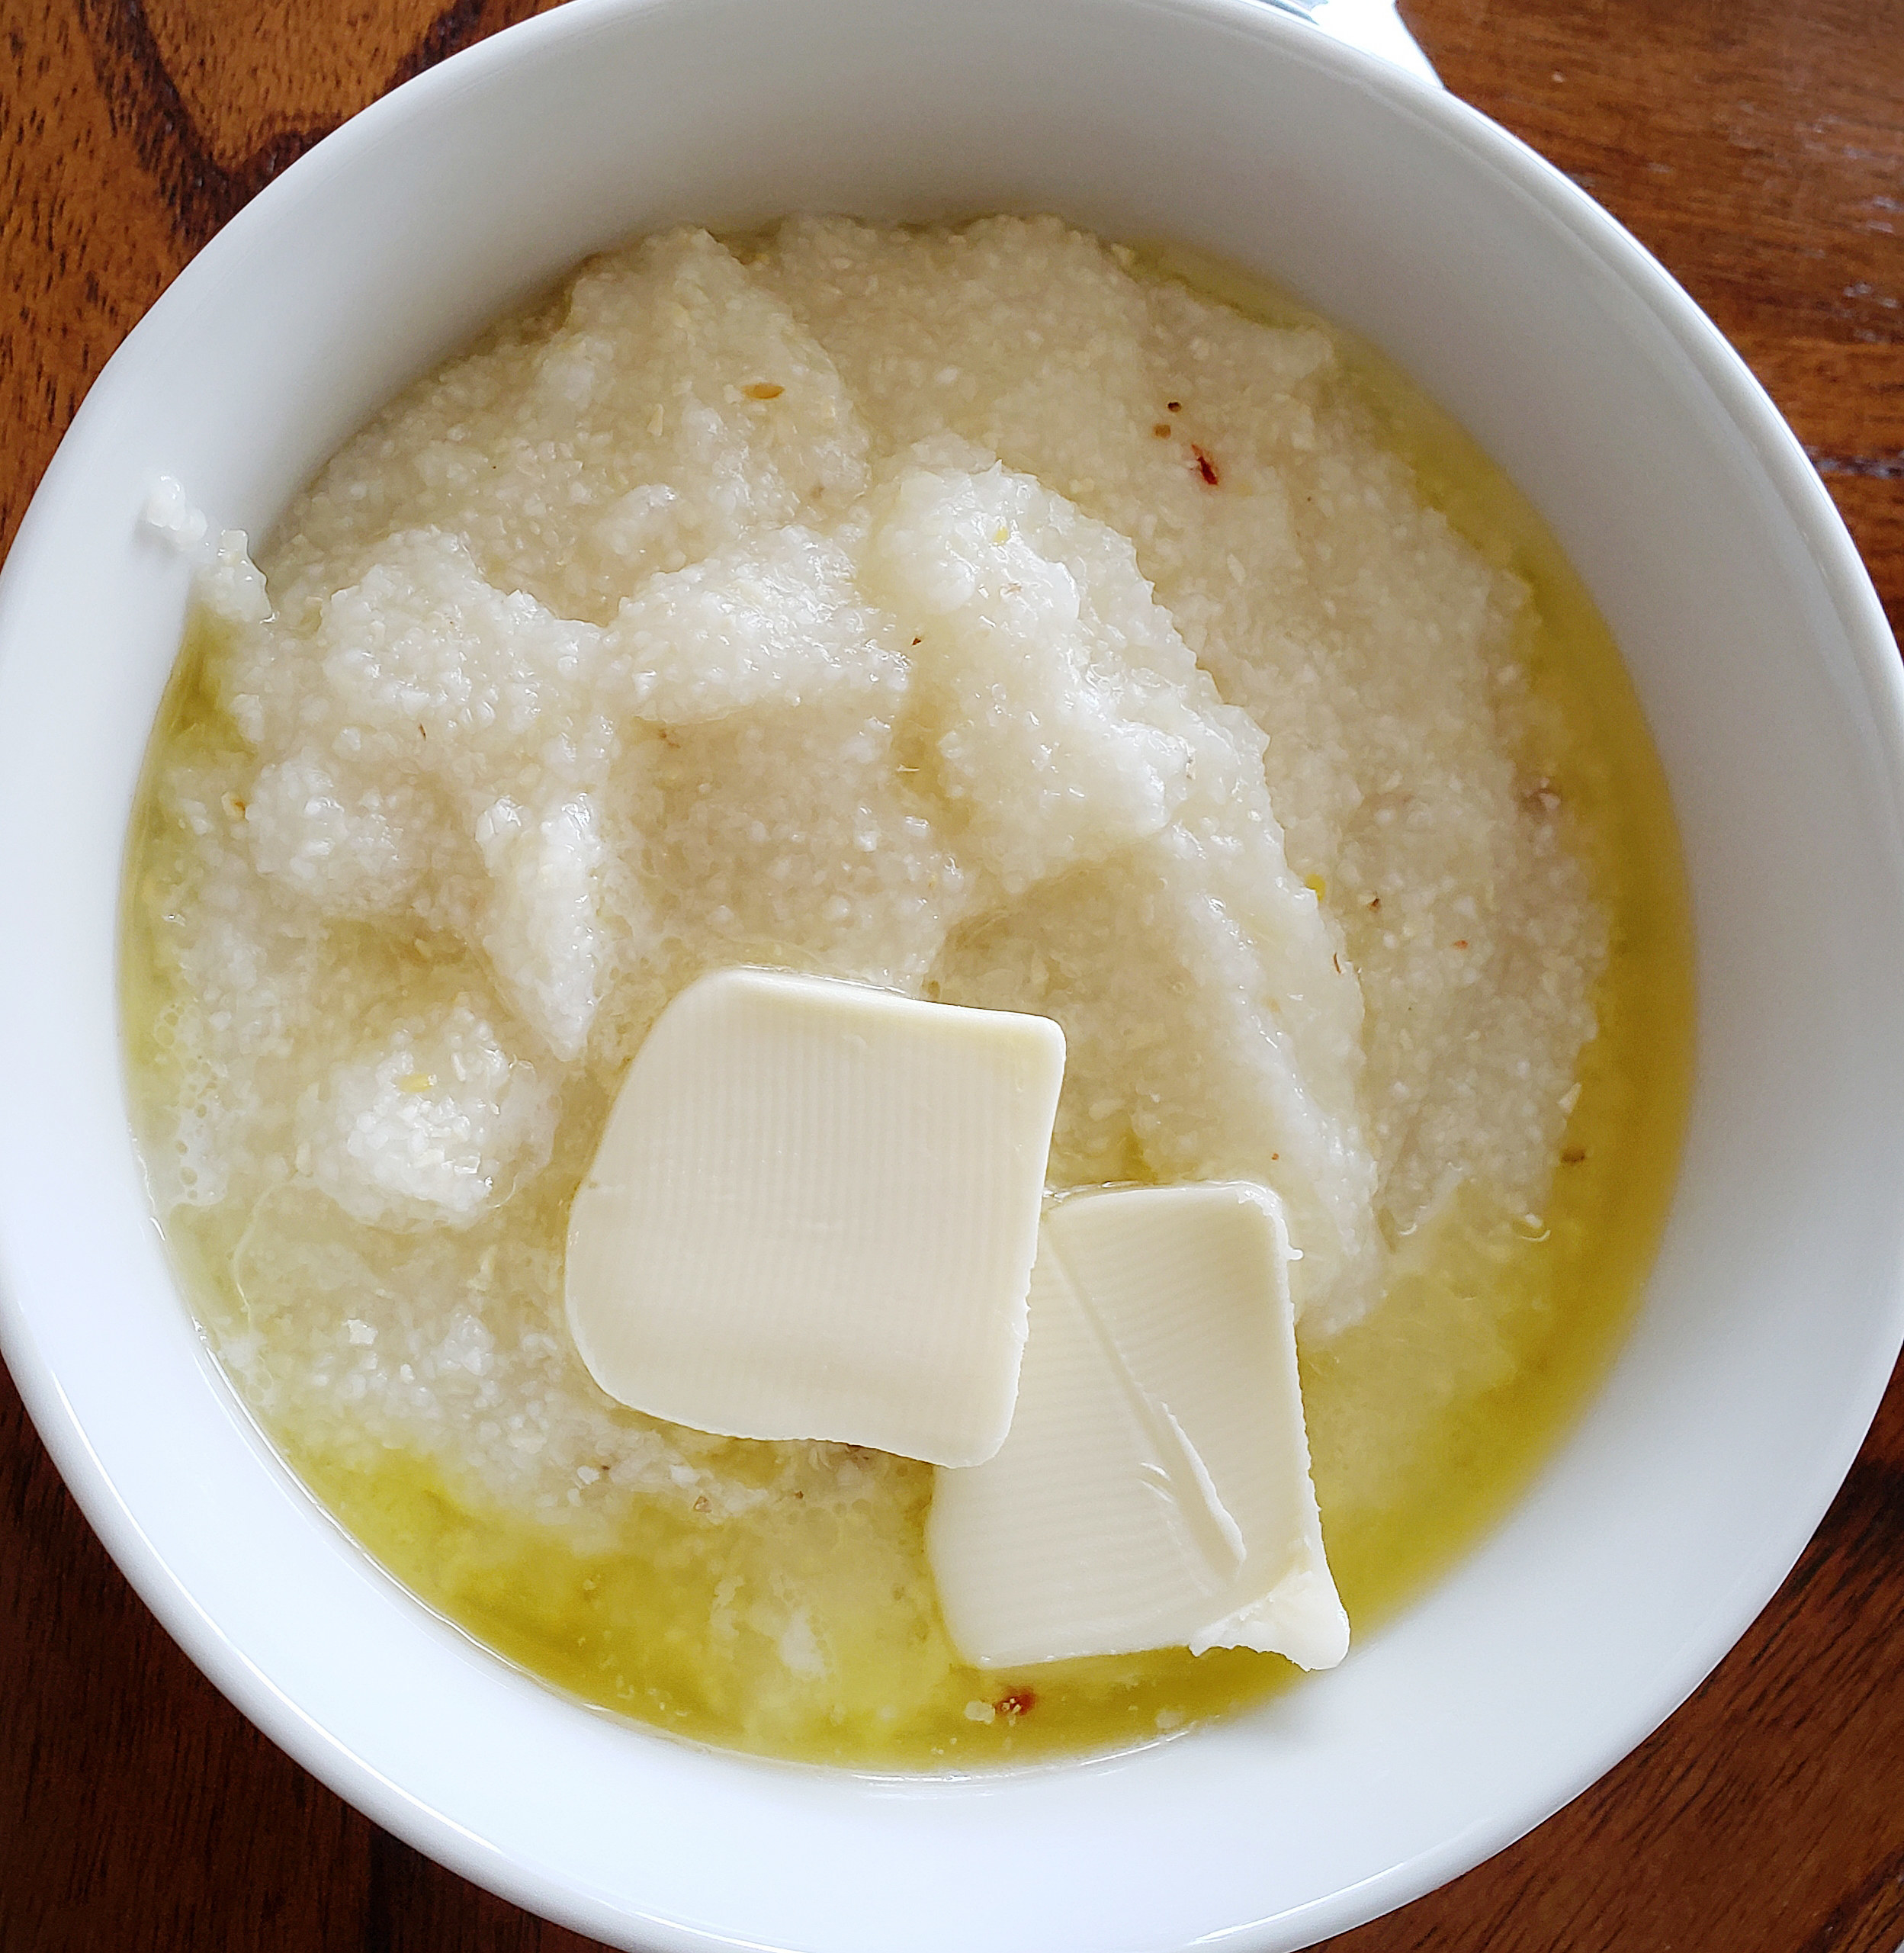 Grits topped with melted butter.